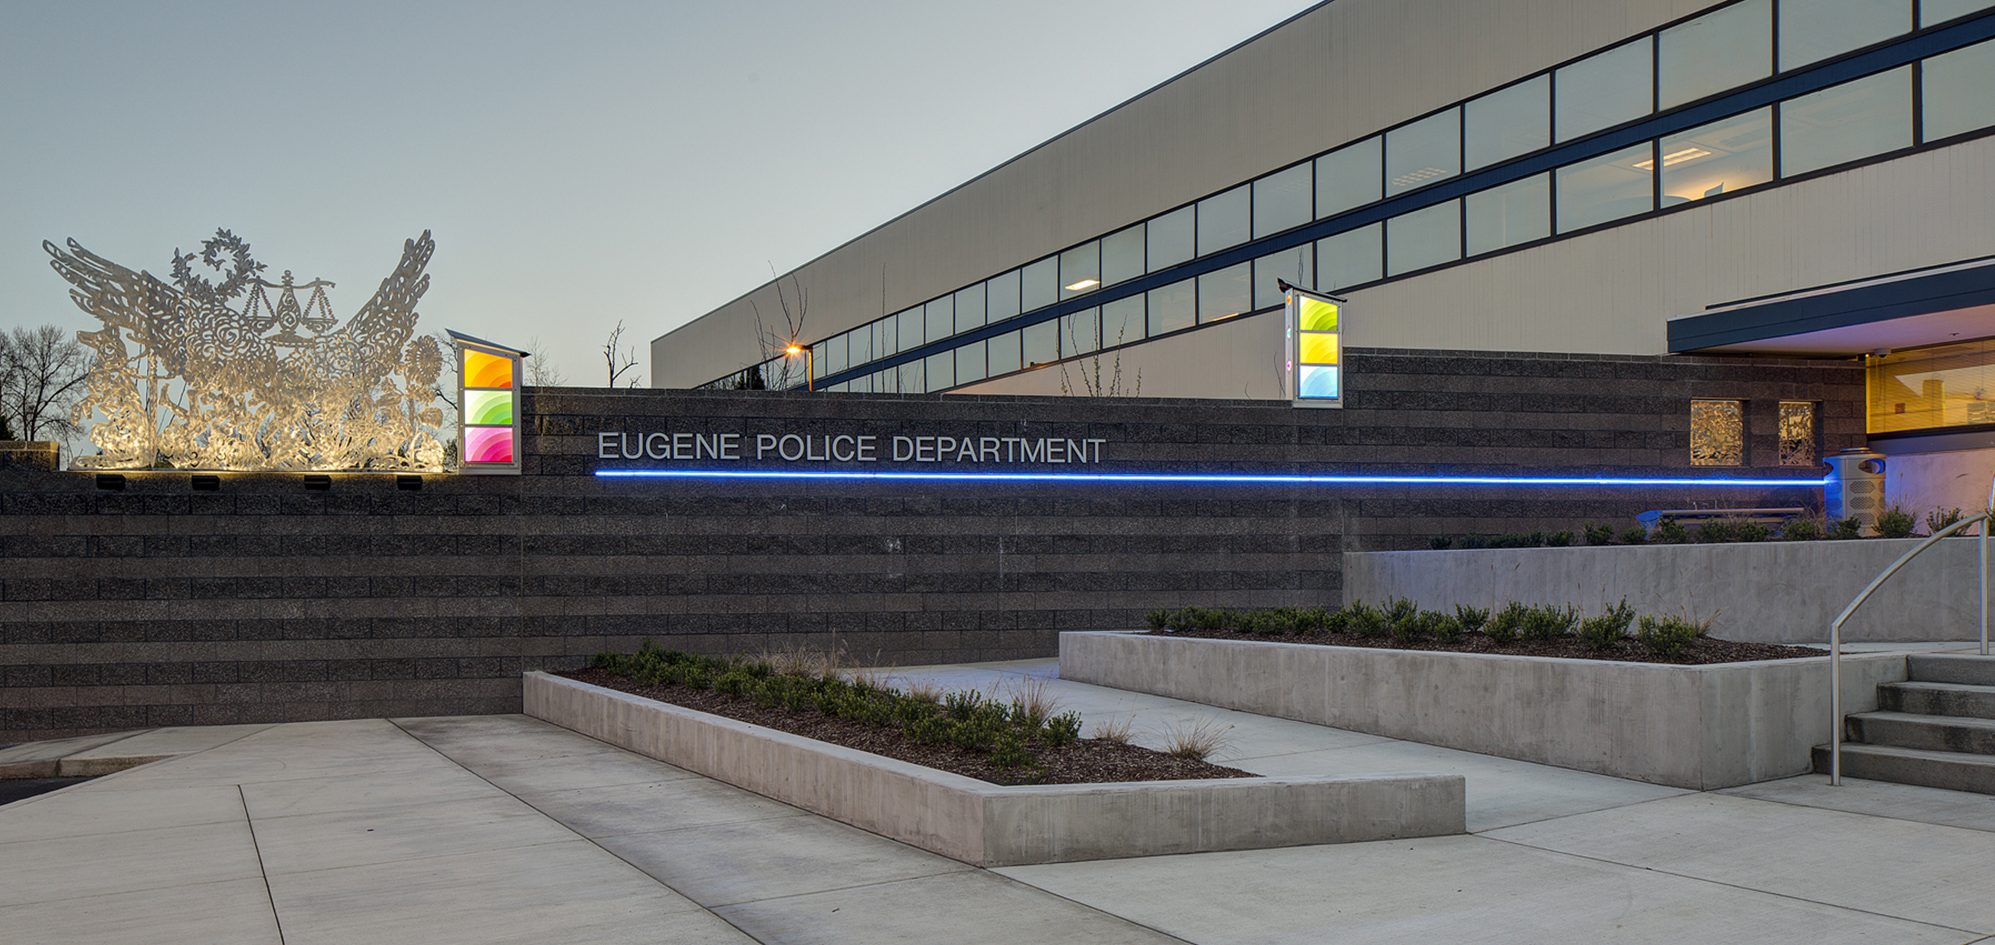 Image of City of Eugene Police Department